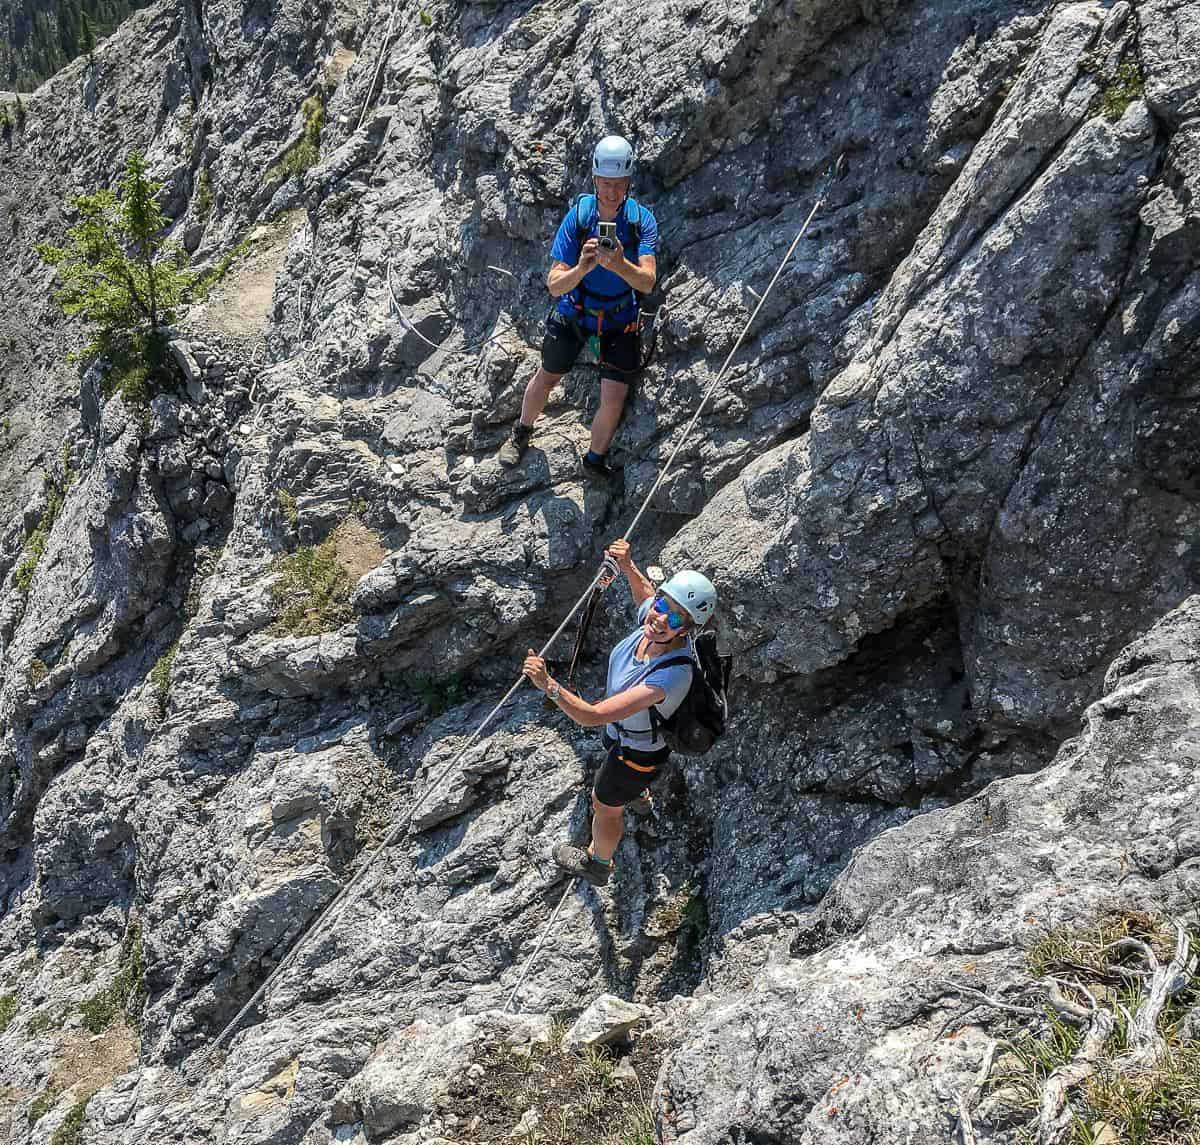 On the cable section of the Mt. Norquay via ferrata